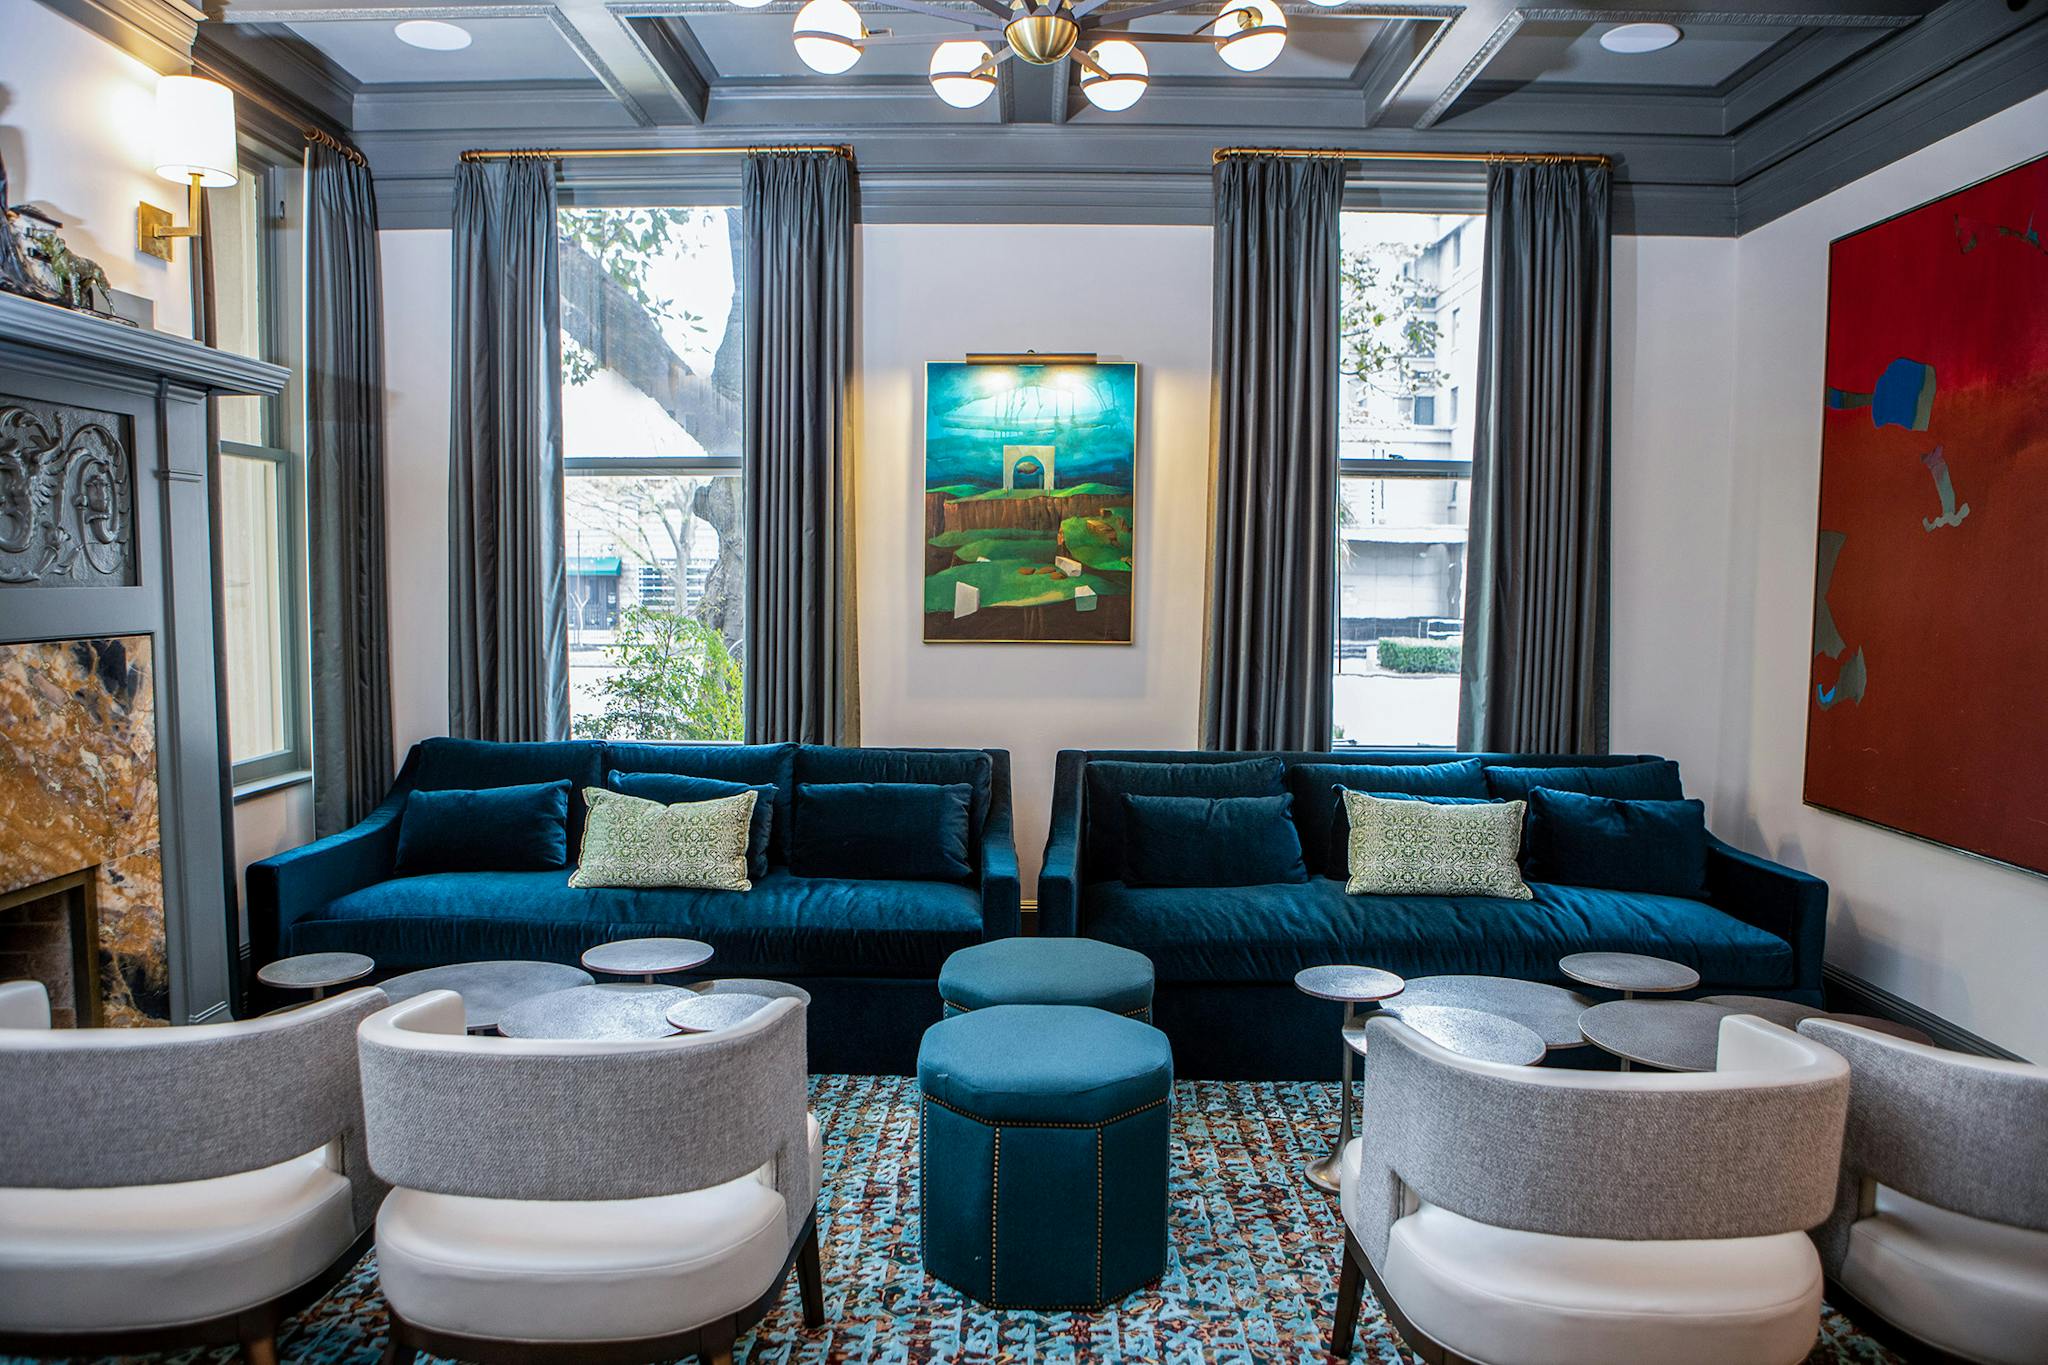 In the lounge, which was originally built as a library, a painting by Texas artist Lucas Johnson shares space with one by fellow Texan Dorothy Hood.